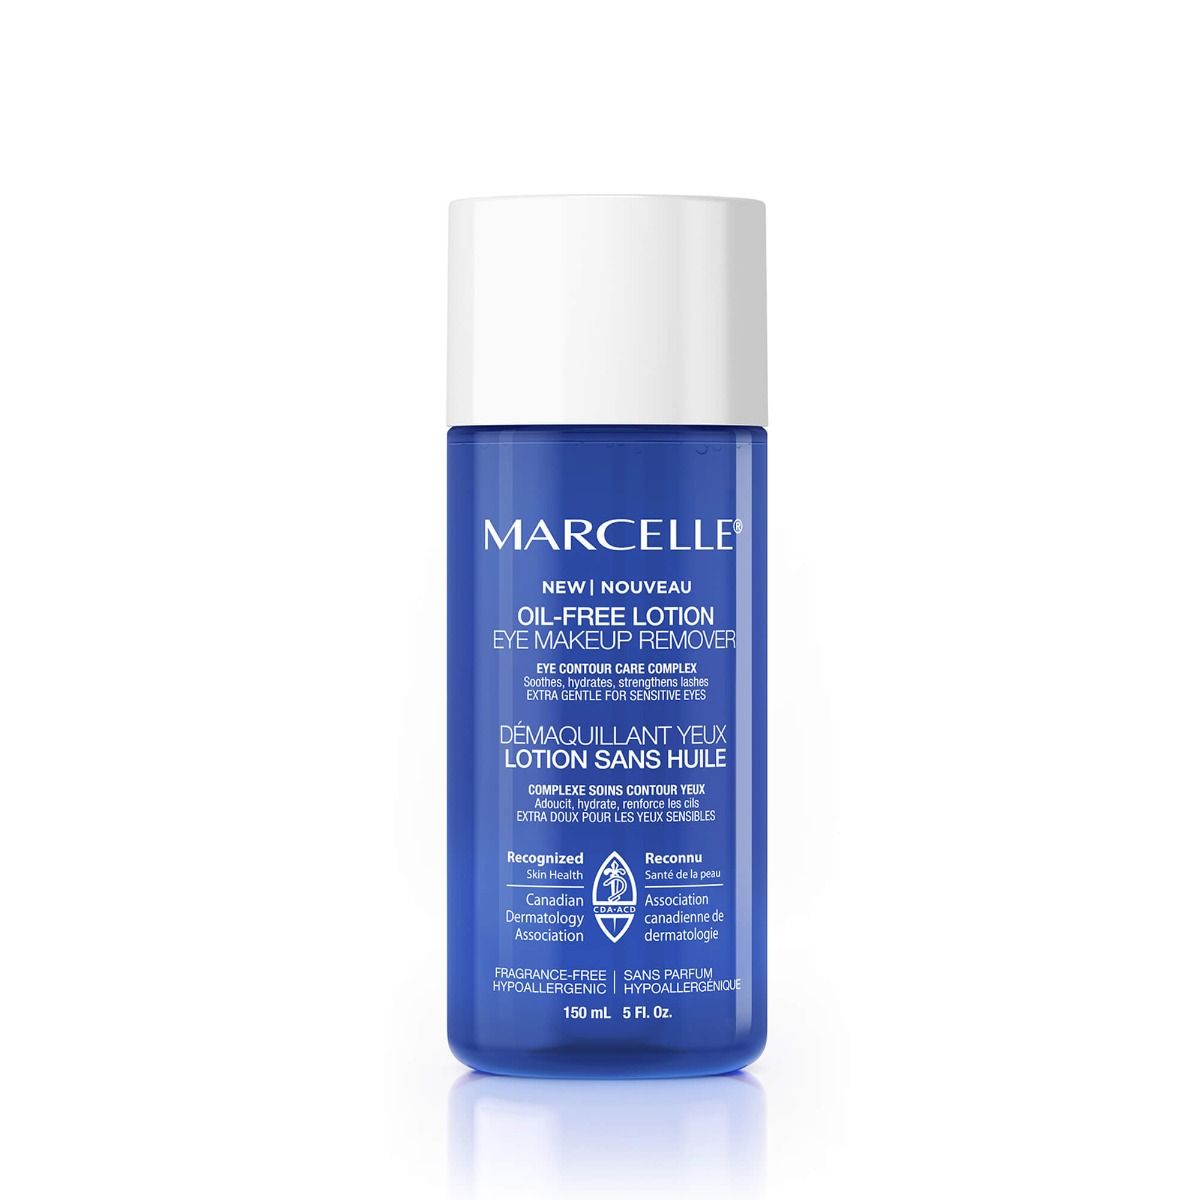 Opgive Hylde banan Buy Oil-Free Eye Makeup Remover Lotion - 150mL by Marcelle for CA$15.95